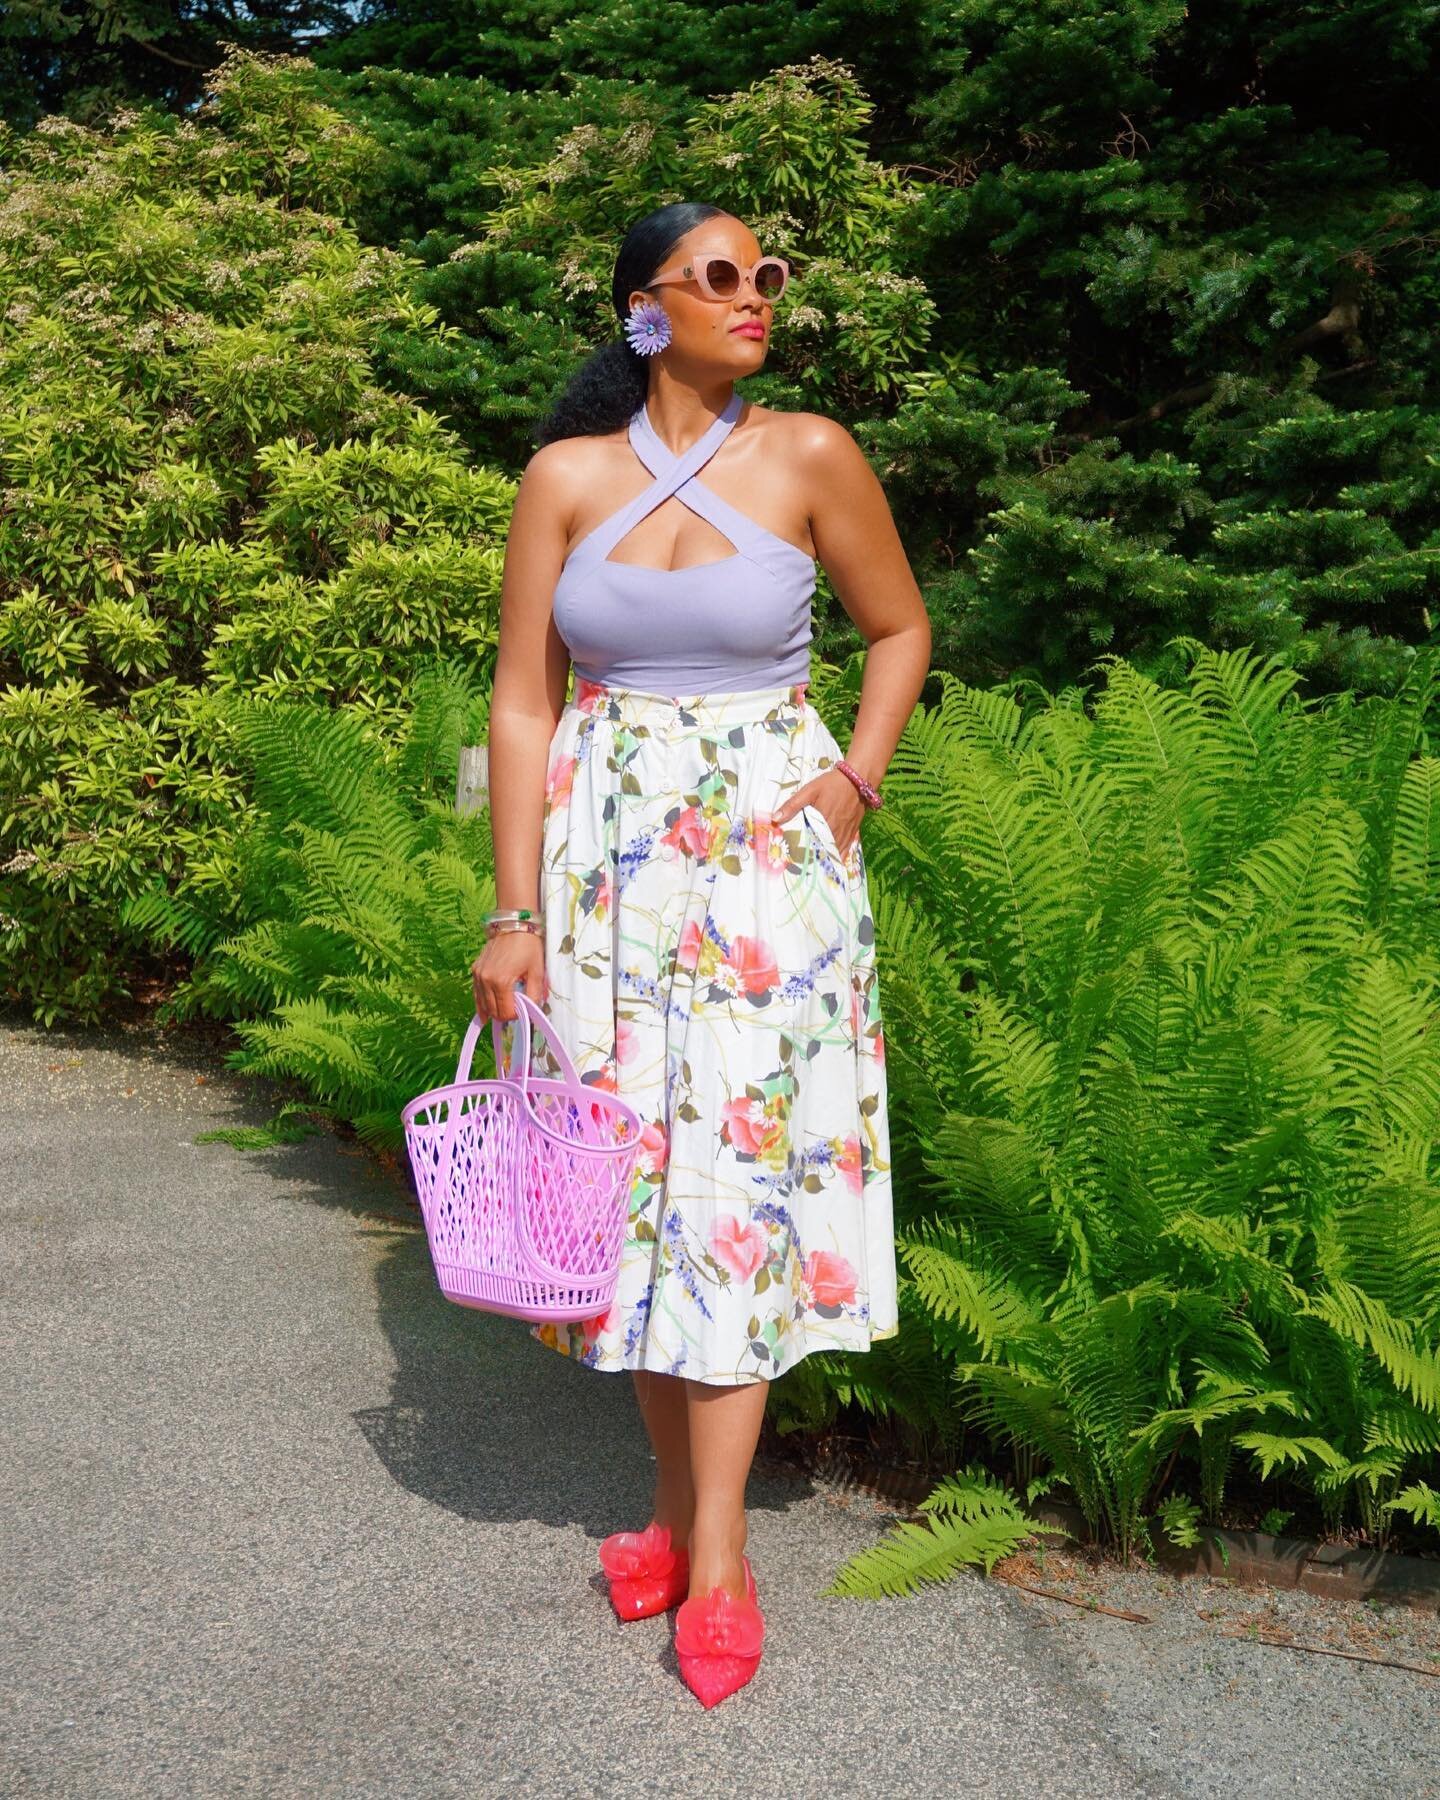 Someone on @TikTok asked why I was carrying around an empty @sunjellies basket 🤣 Were y&rsquo;all wondering the same thing? 

Swipe to the end for the answer 💜🌸

#sunjellies #sunjelliesbag #retromodern #modernvintagestyle #retrojellybasket #whatkr